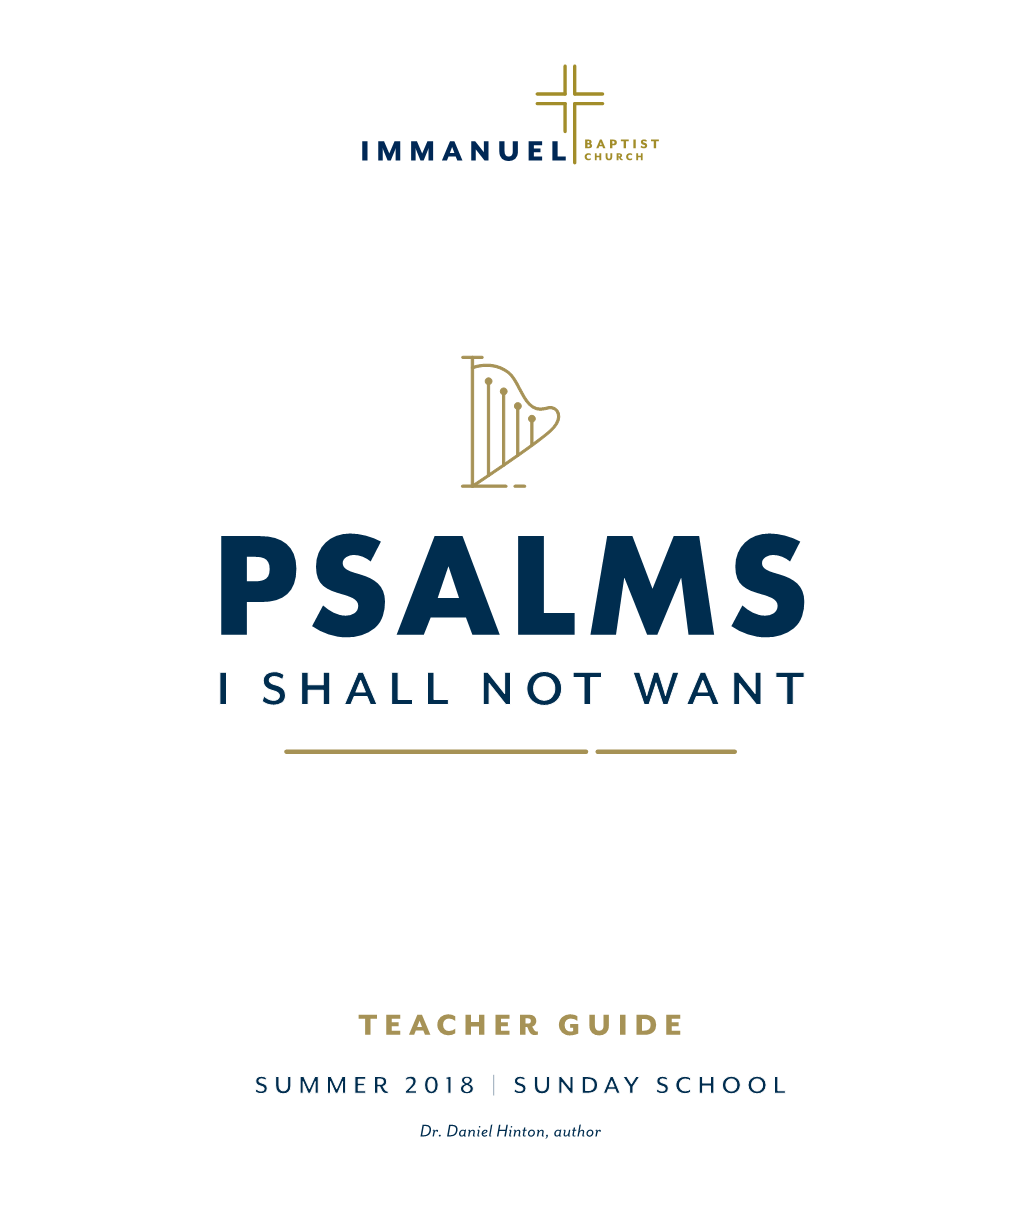 PSALMS Teacher Guide | Summer 2018 HISTORICAL CONTEXT REFERENCE GUIDE